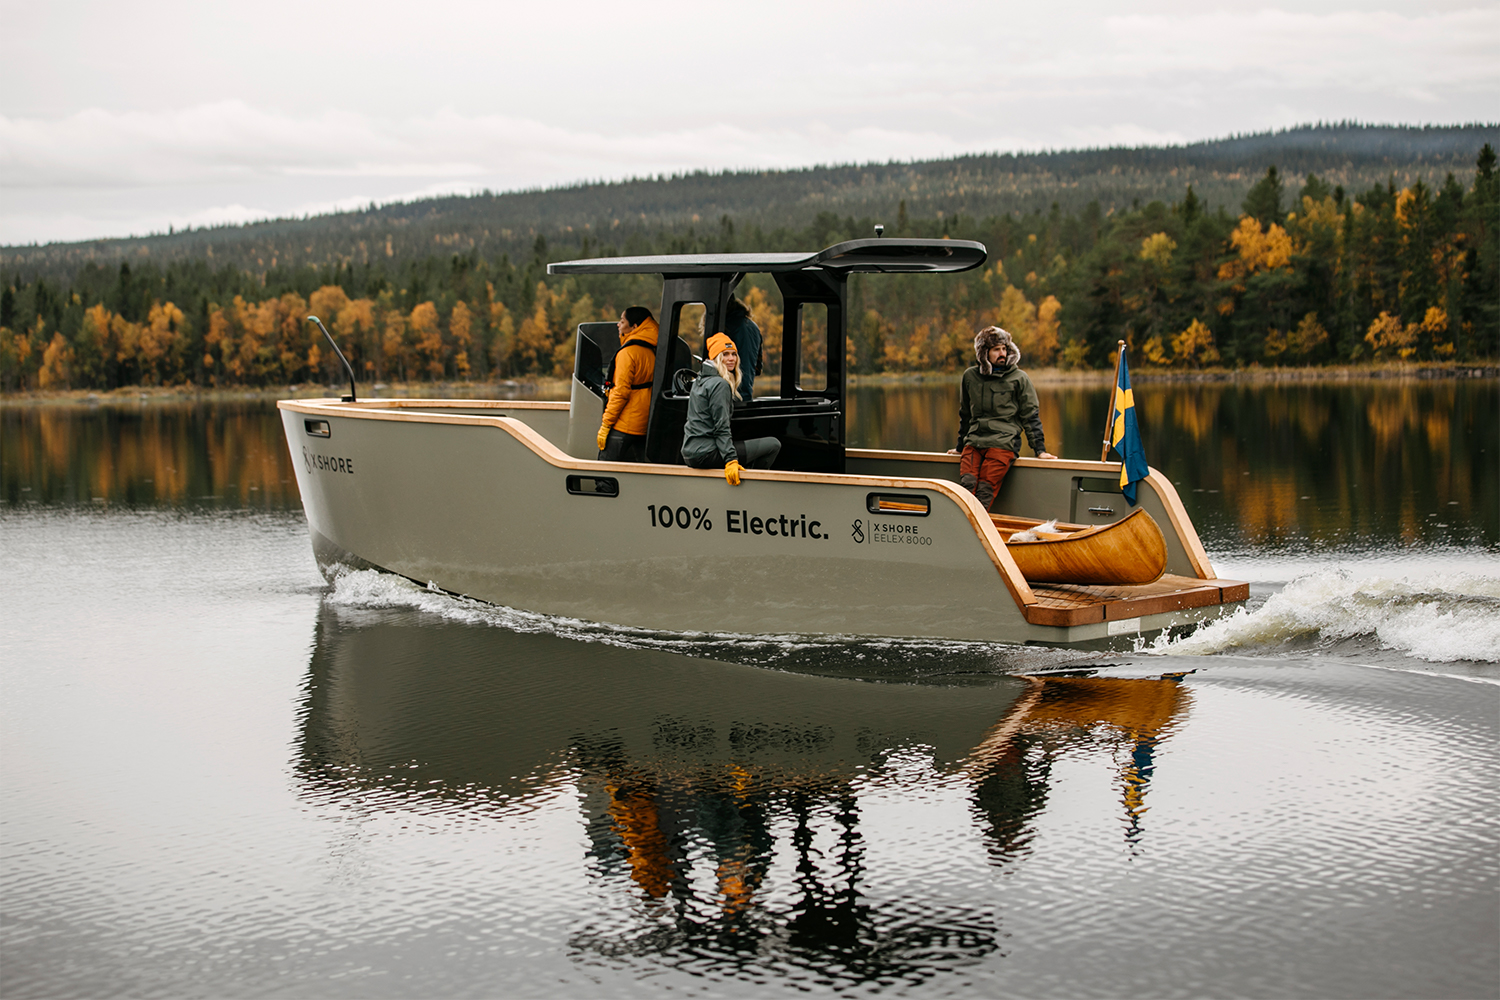 The 100% electric Eelex 8000 from X Shore slowly gliding through still water with fall foliage in the background. The Swedish electric boat builder hopes to be a leader in the industry.